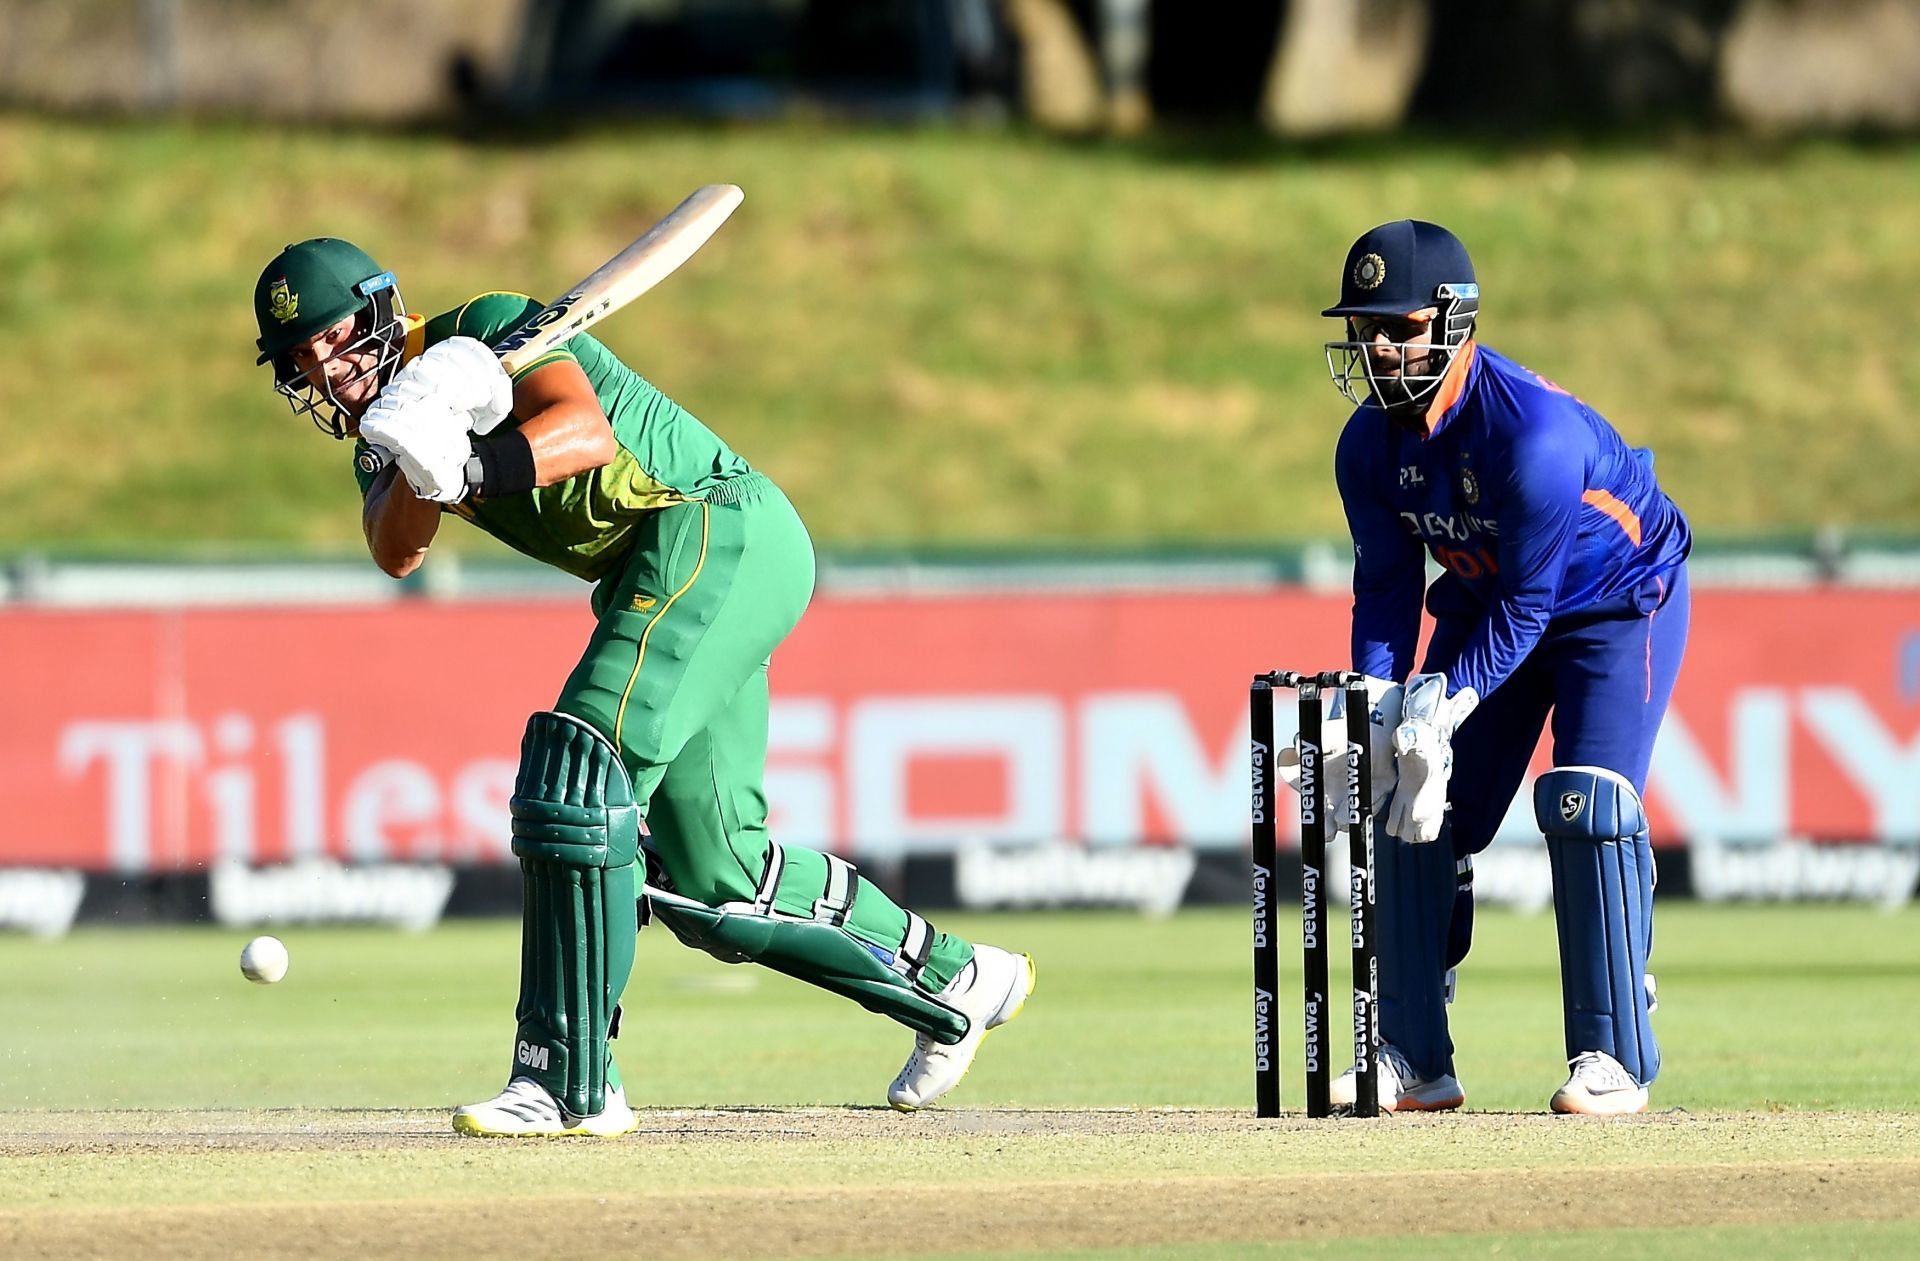 South Africa chased a 288-run target to win the match.